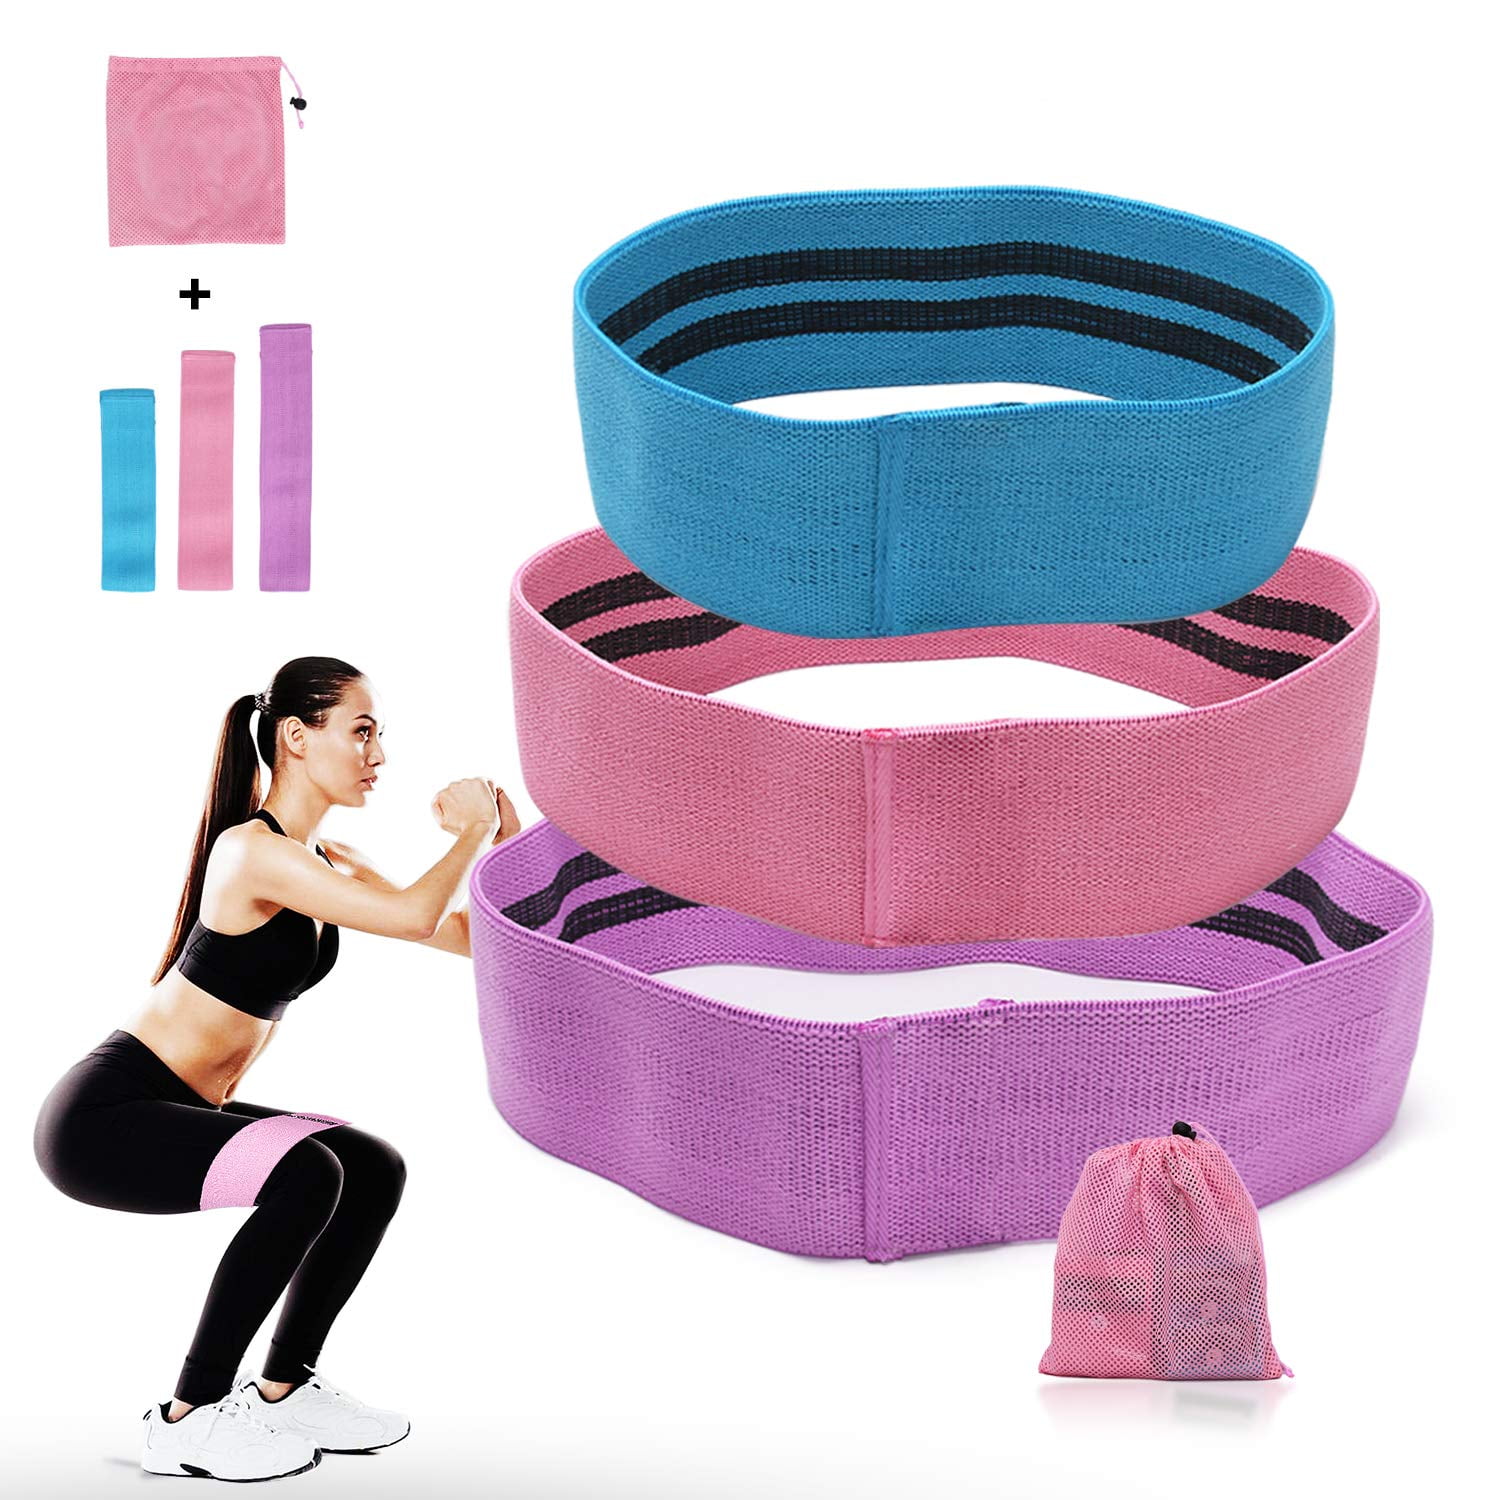 Life-time Warranty Exercise Bands Booty Bands Hip Bands Wide Workout Bands Sports-Fitness Bands Stretch Resistance Loops Band Anti Slip Elastic Resistance Bands for Legs and Butt 